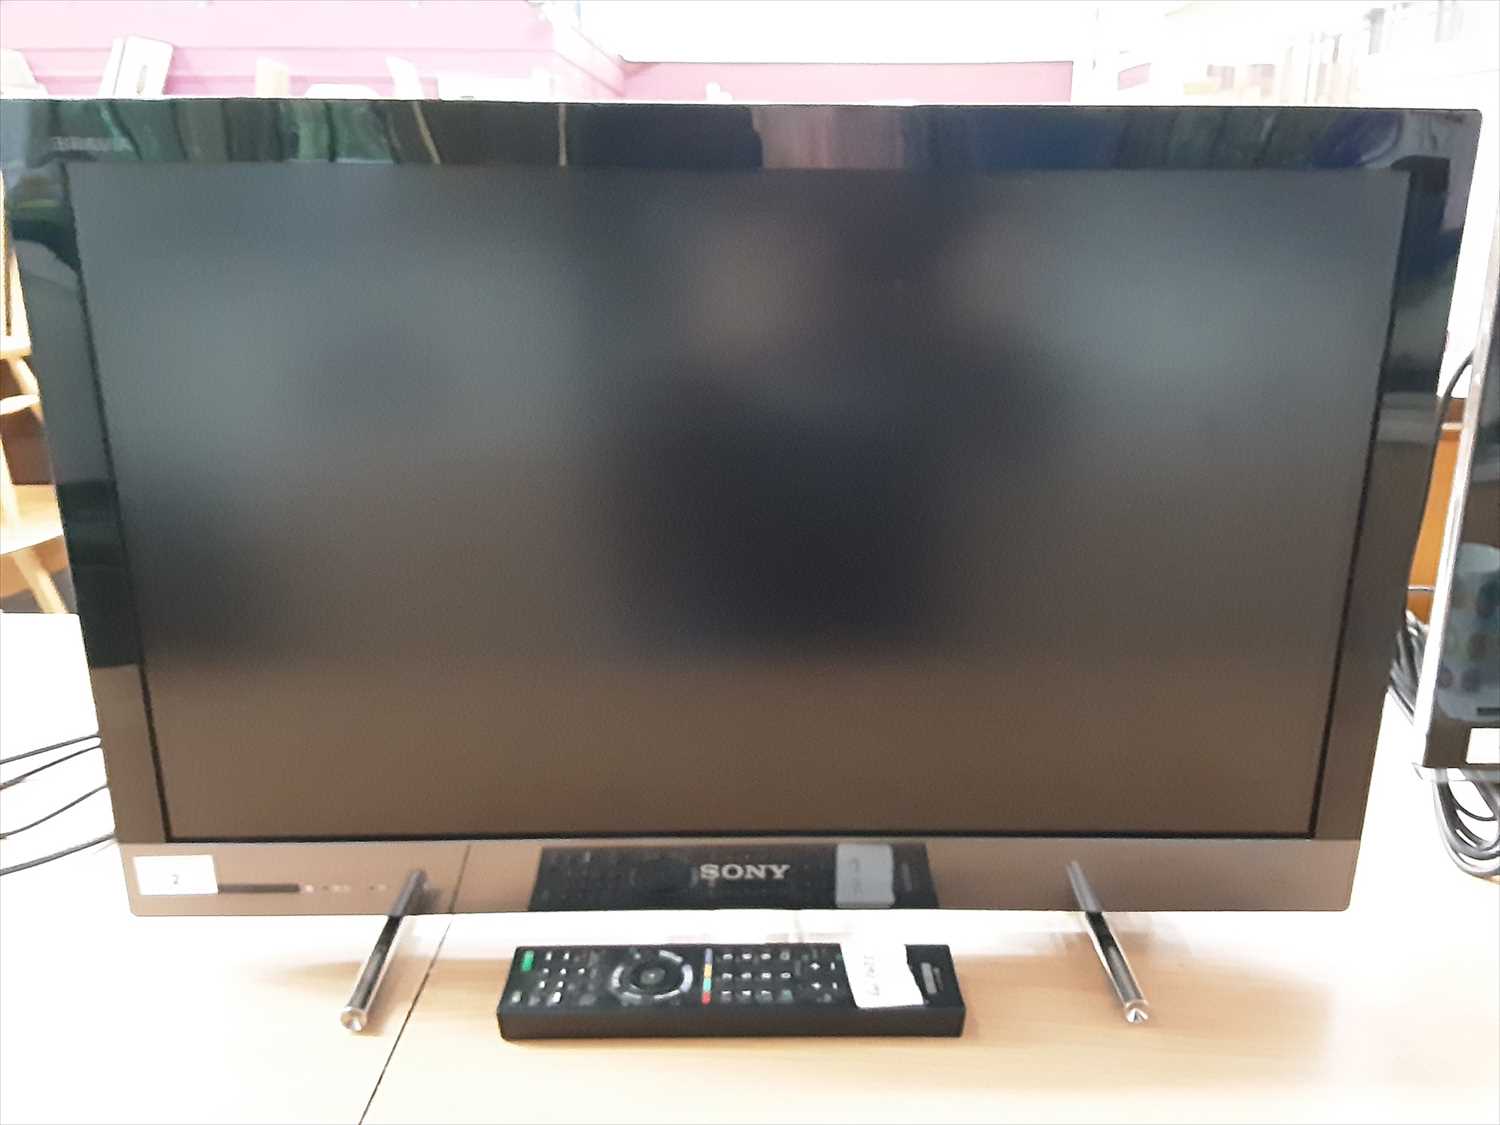 Lot 2 - Sony TV  model number KDL-26EX320 with remote control